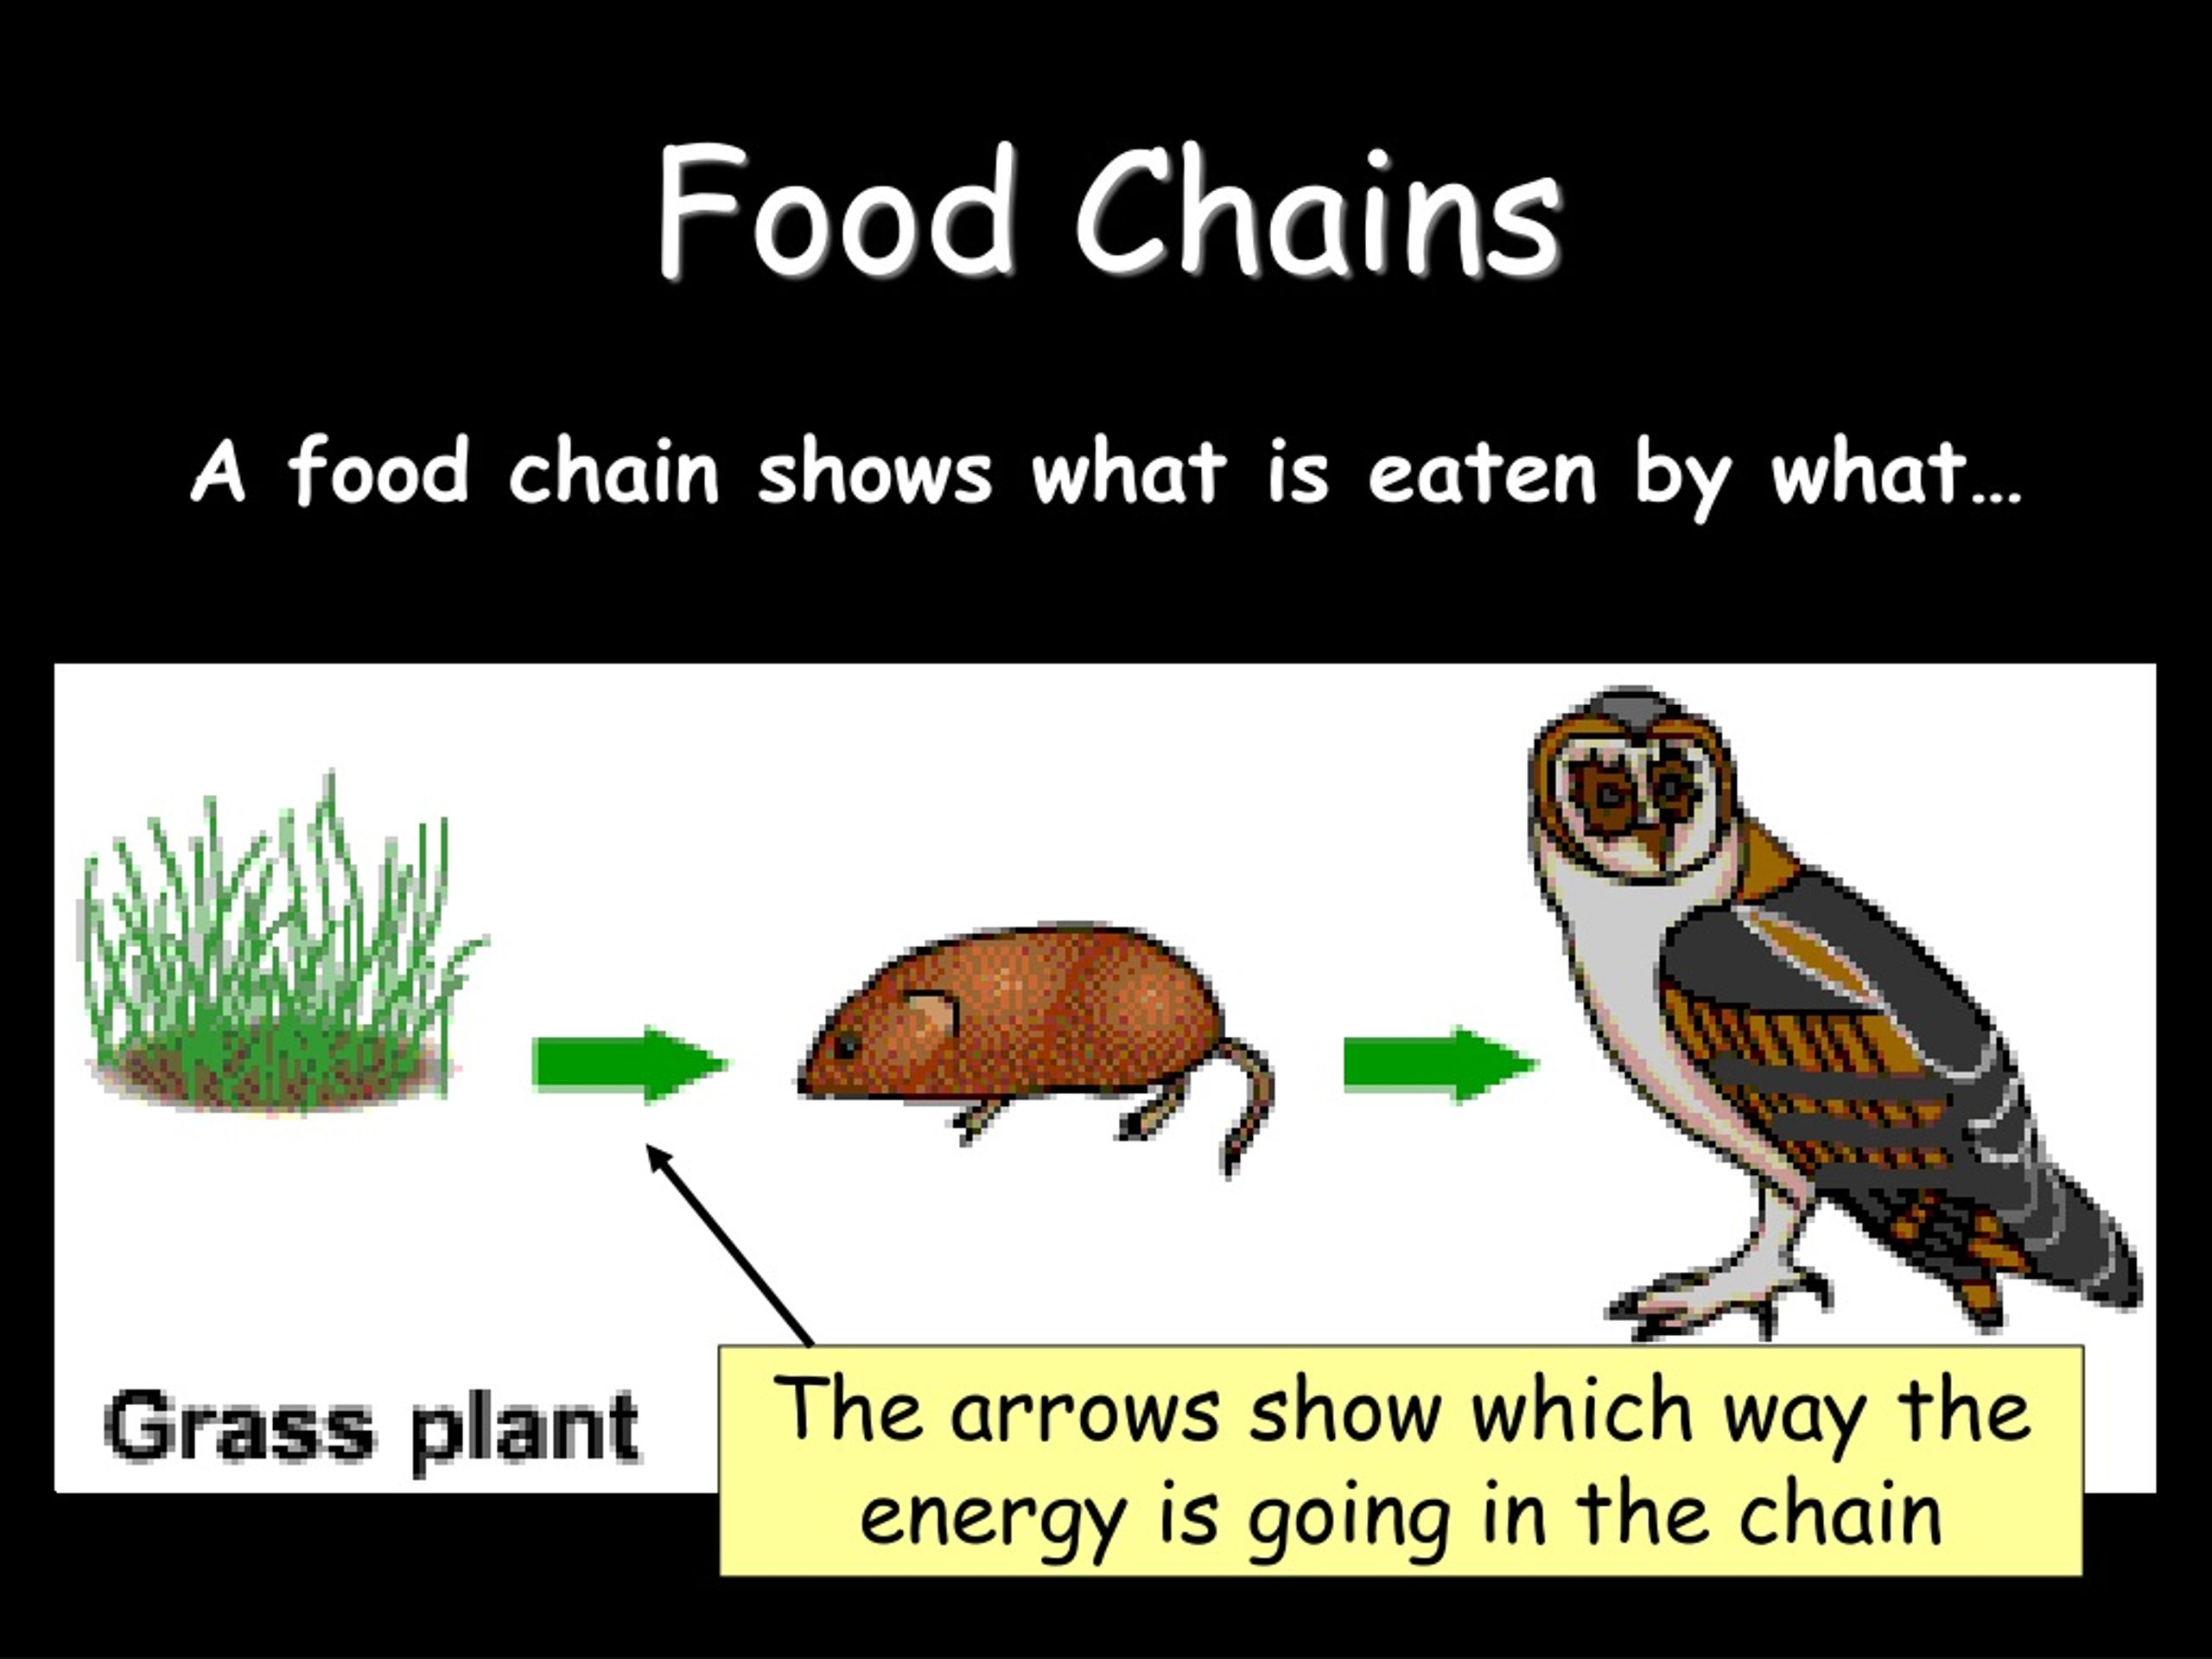 PPT Food Chains Food Webs PowerPoint Presentation, free download ID